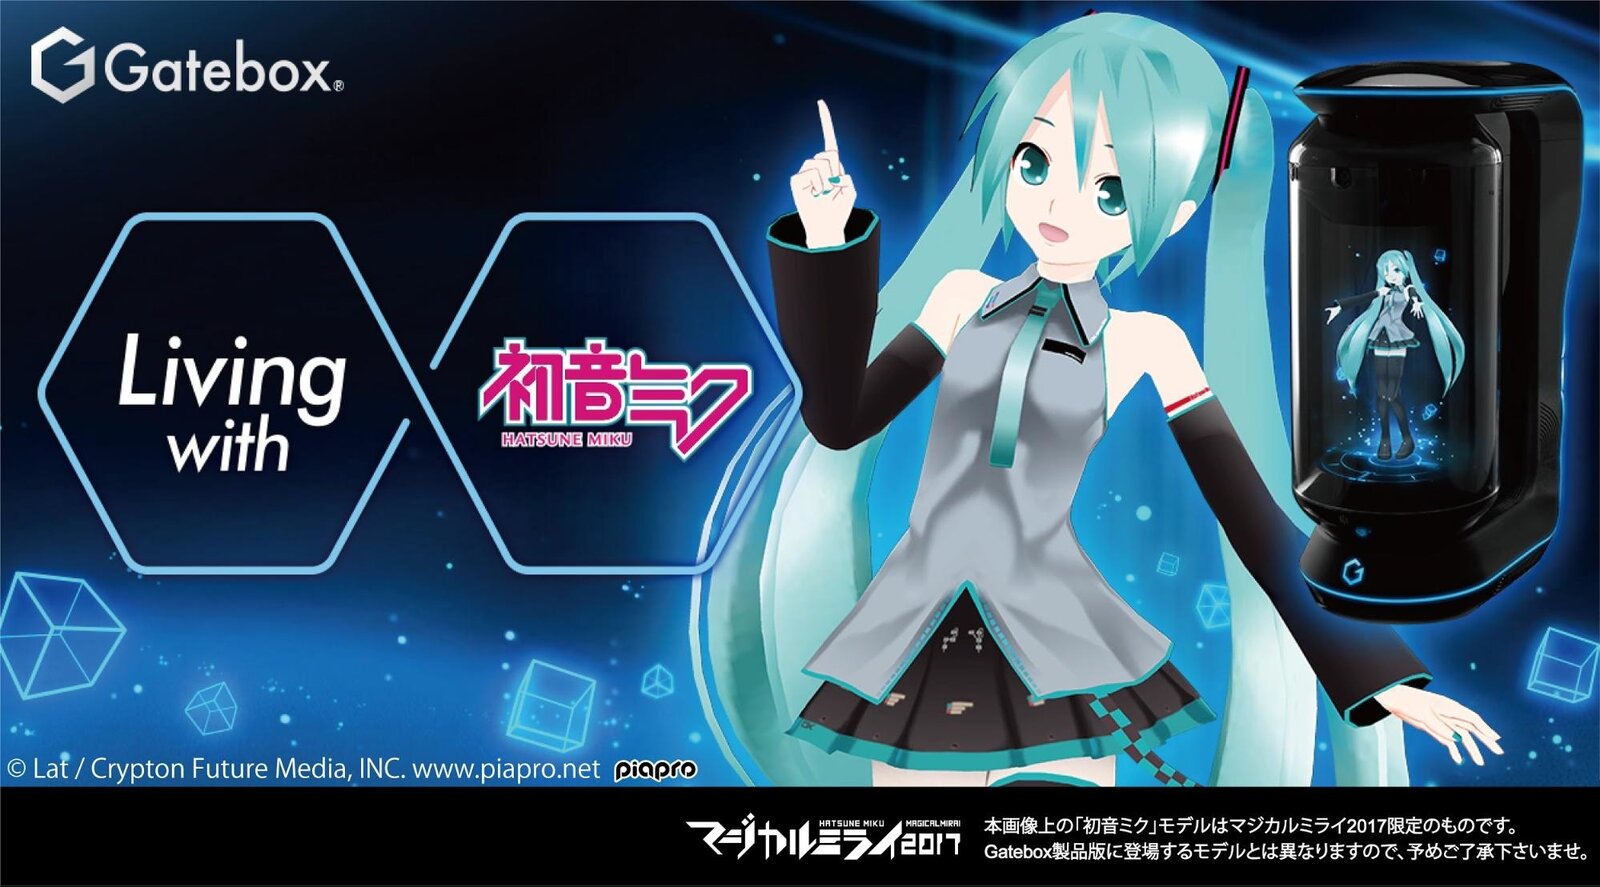 Gatebox: Making a Reality Out of Living with Hatsune Miku | Event